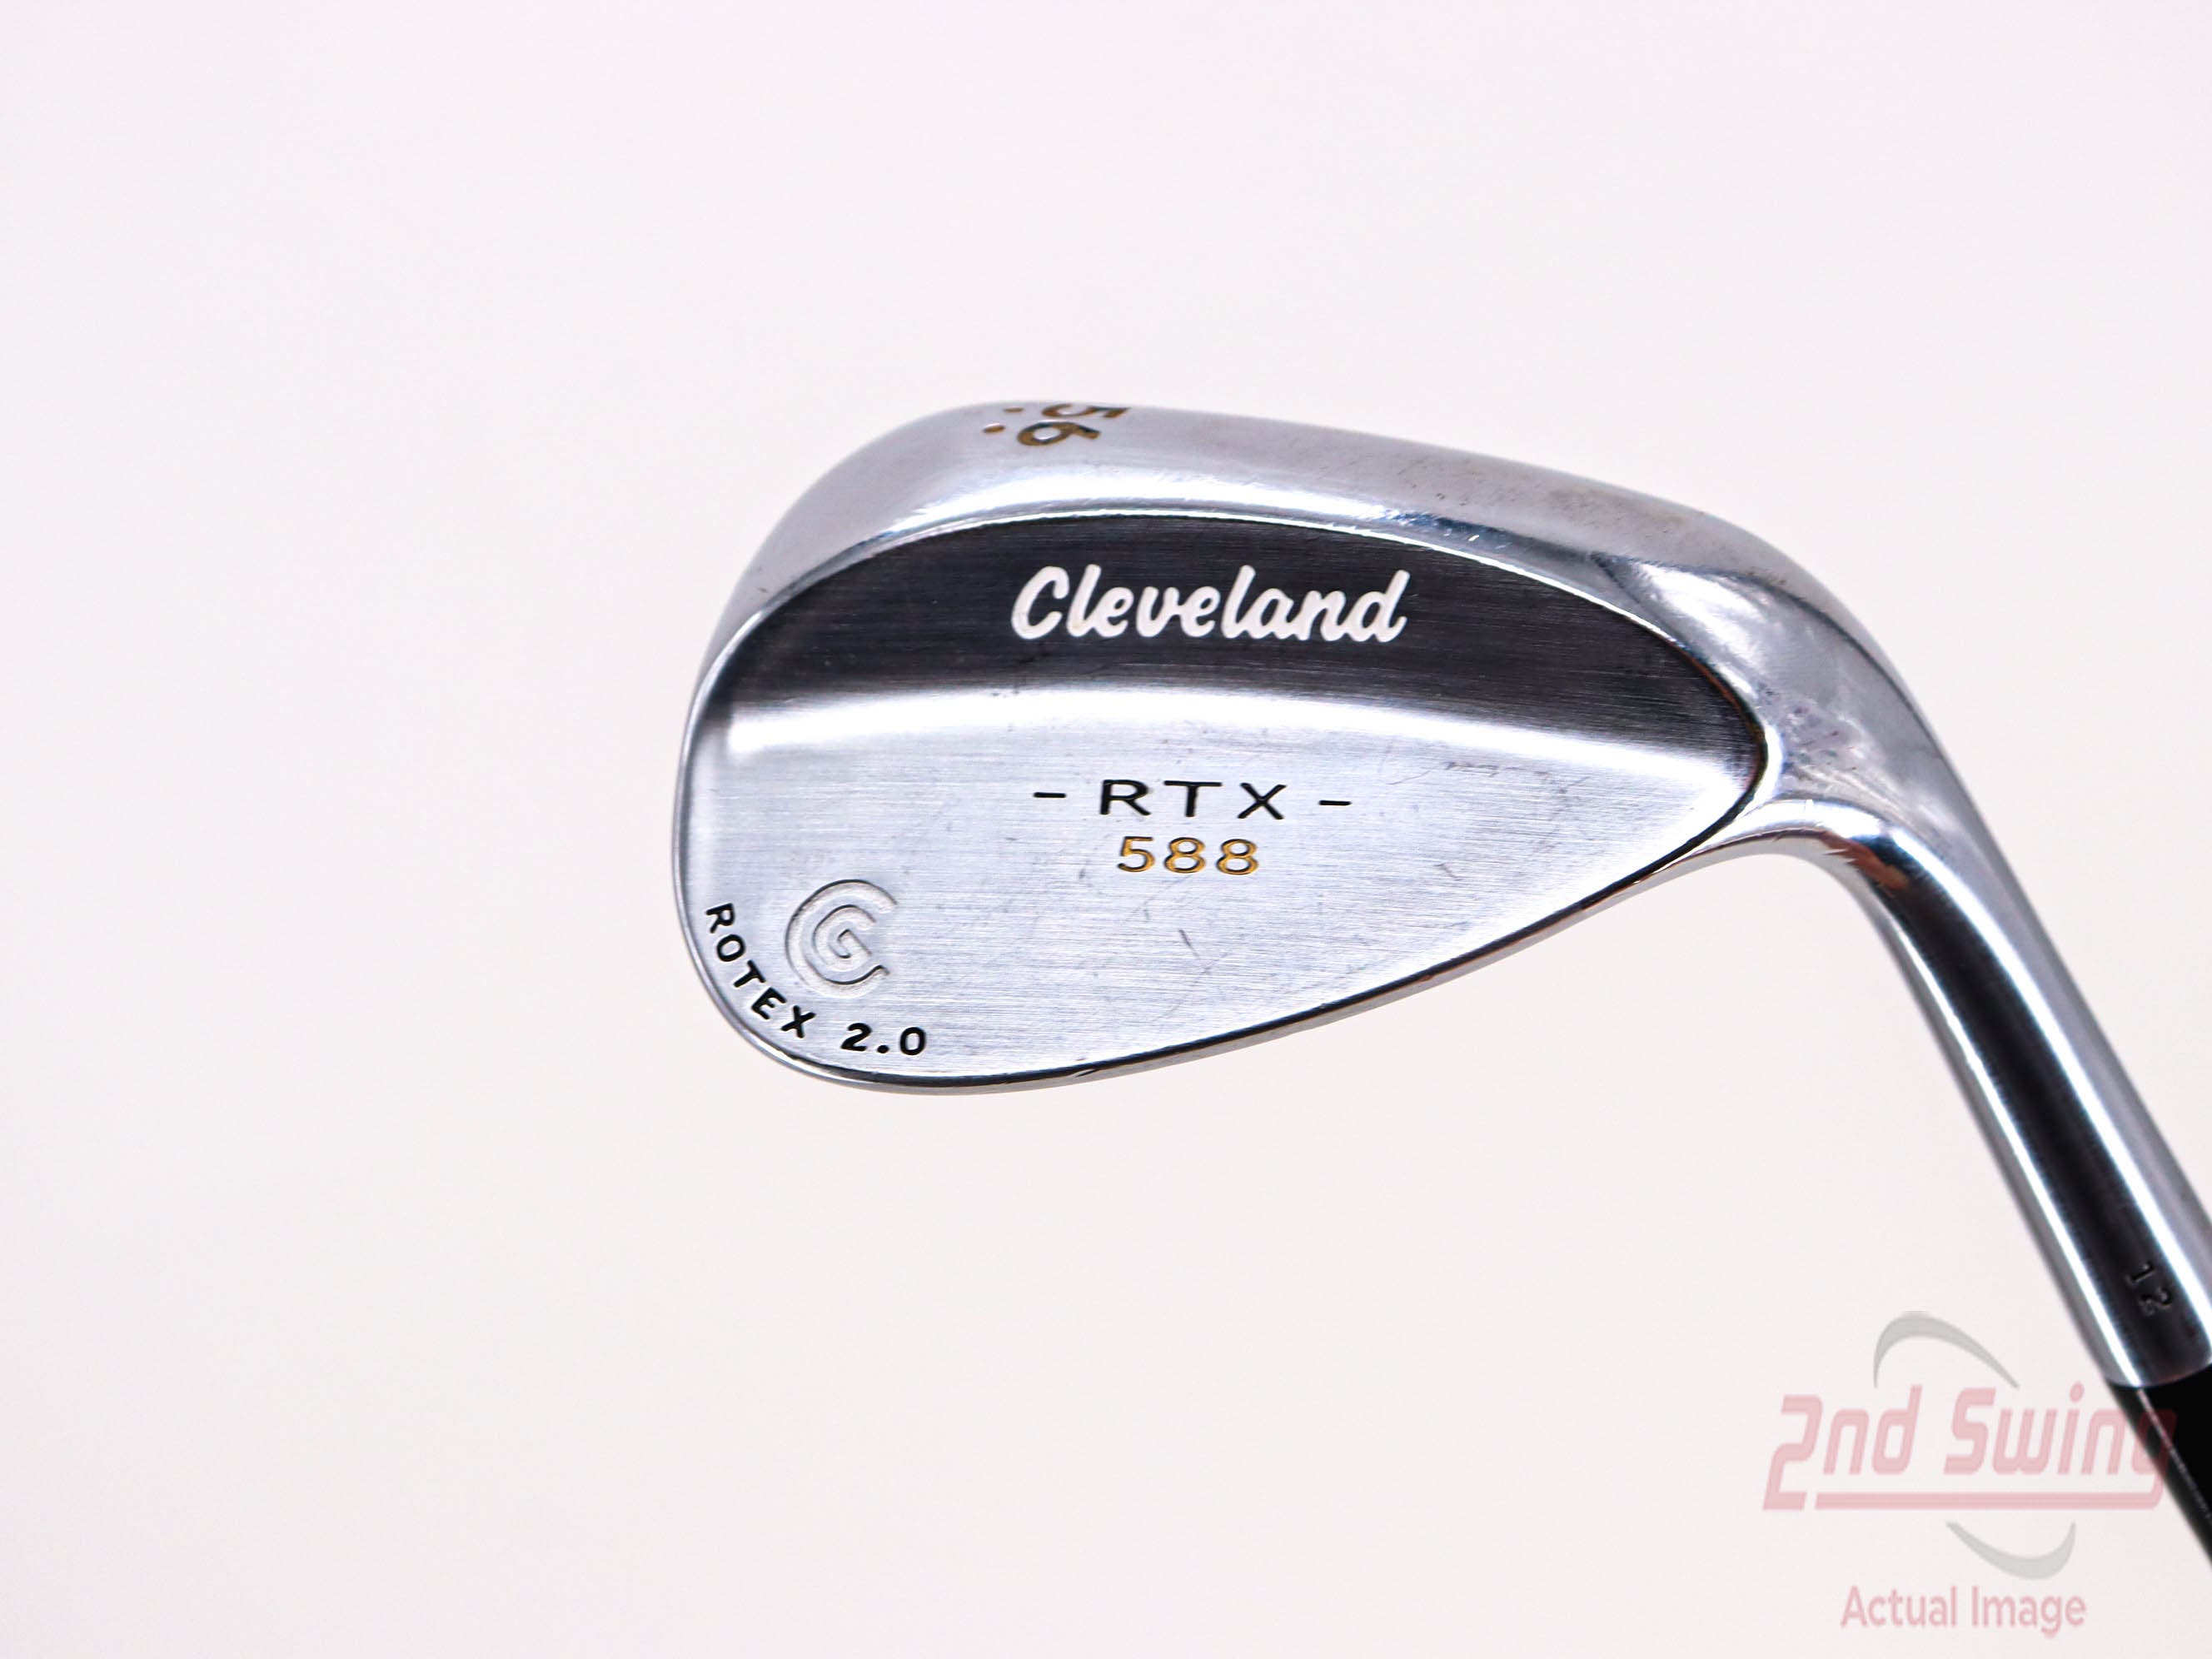 Cleveland 588 RTX 2.0 Tour Satin Wedge | 2nd Swing Golf